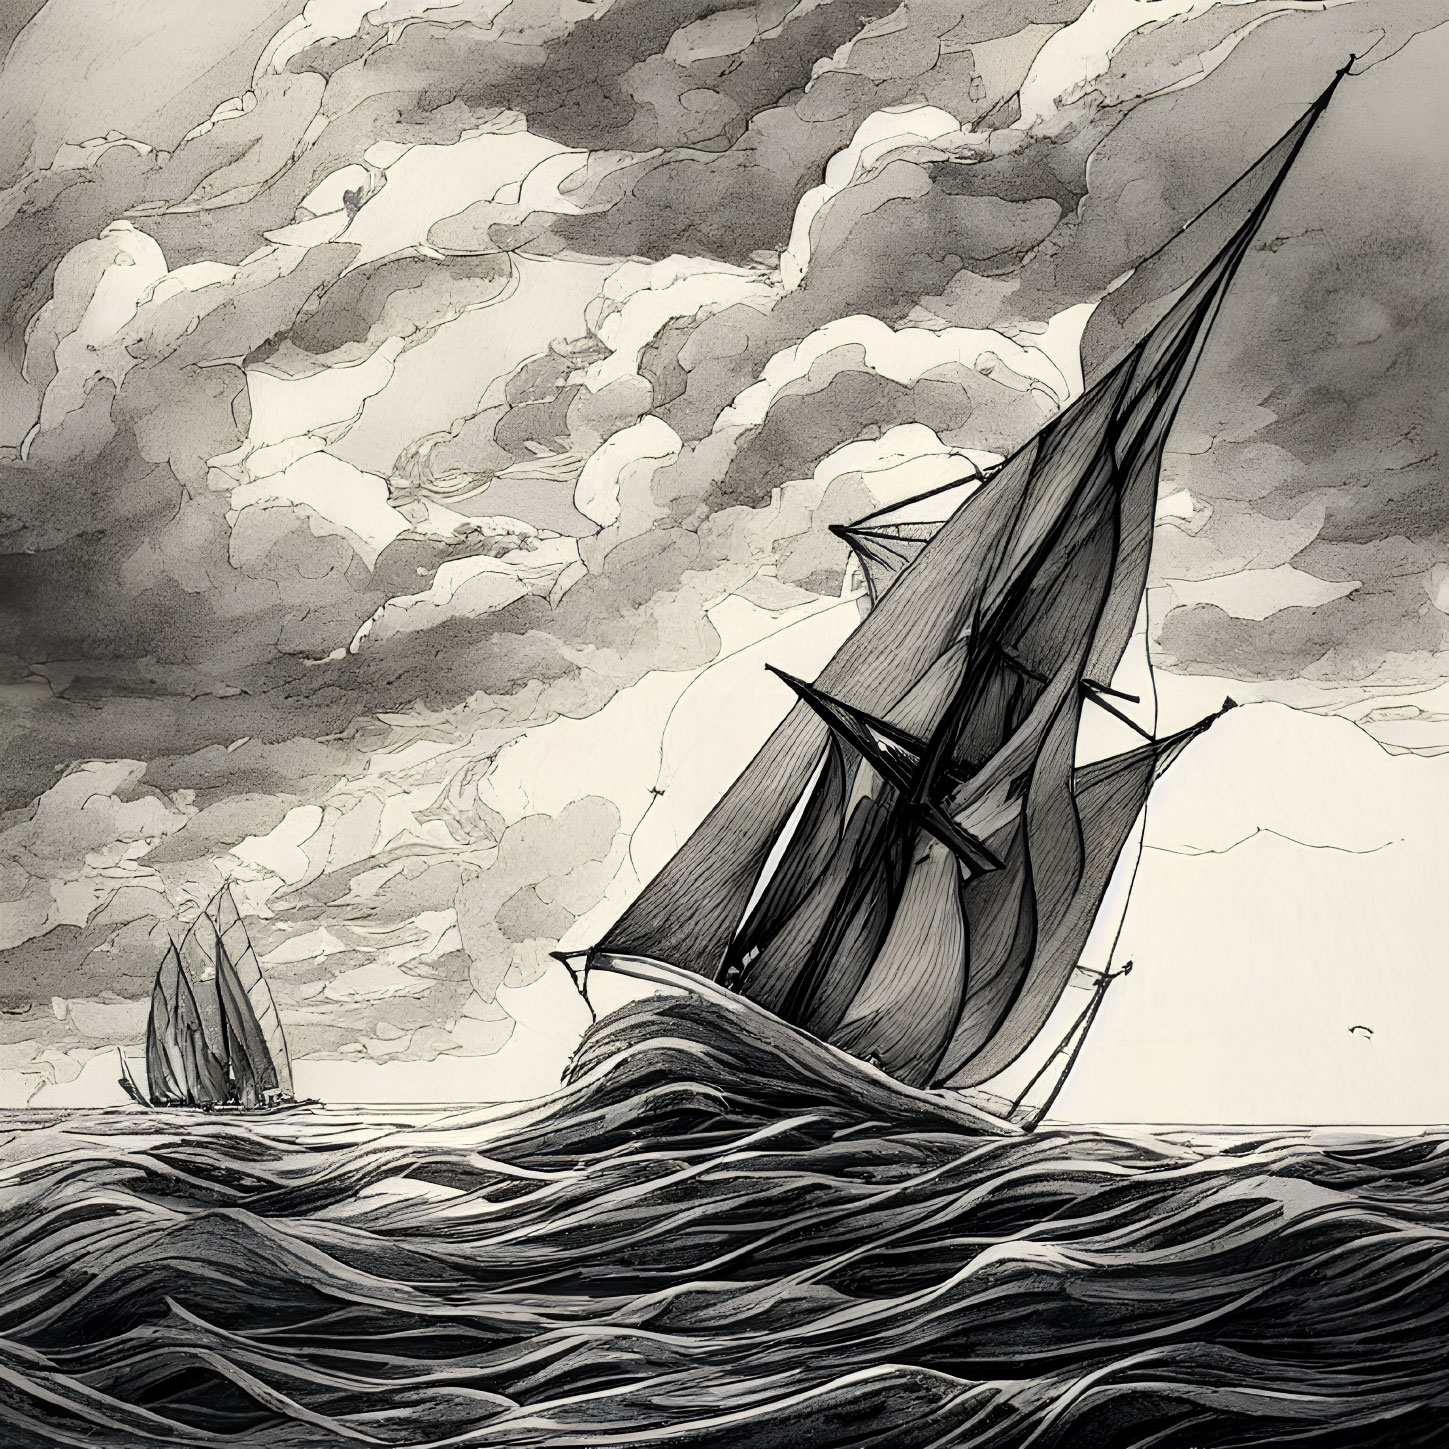 Monochrome Ink Drawing of Sailboats on Turbulent Waves